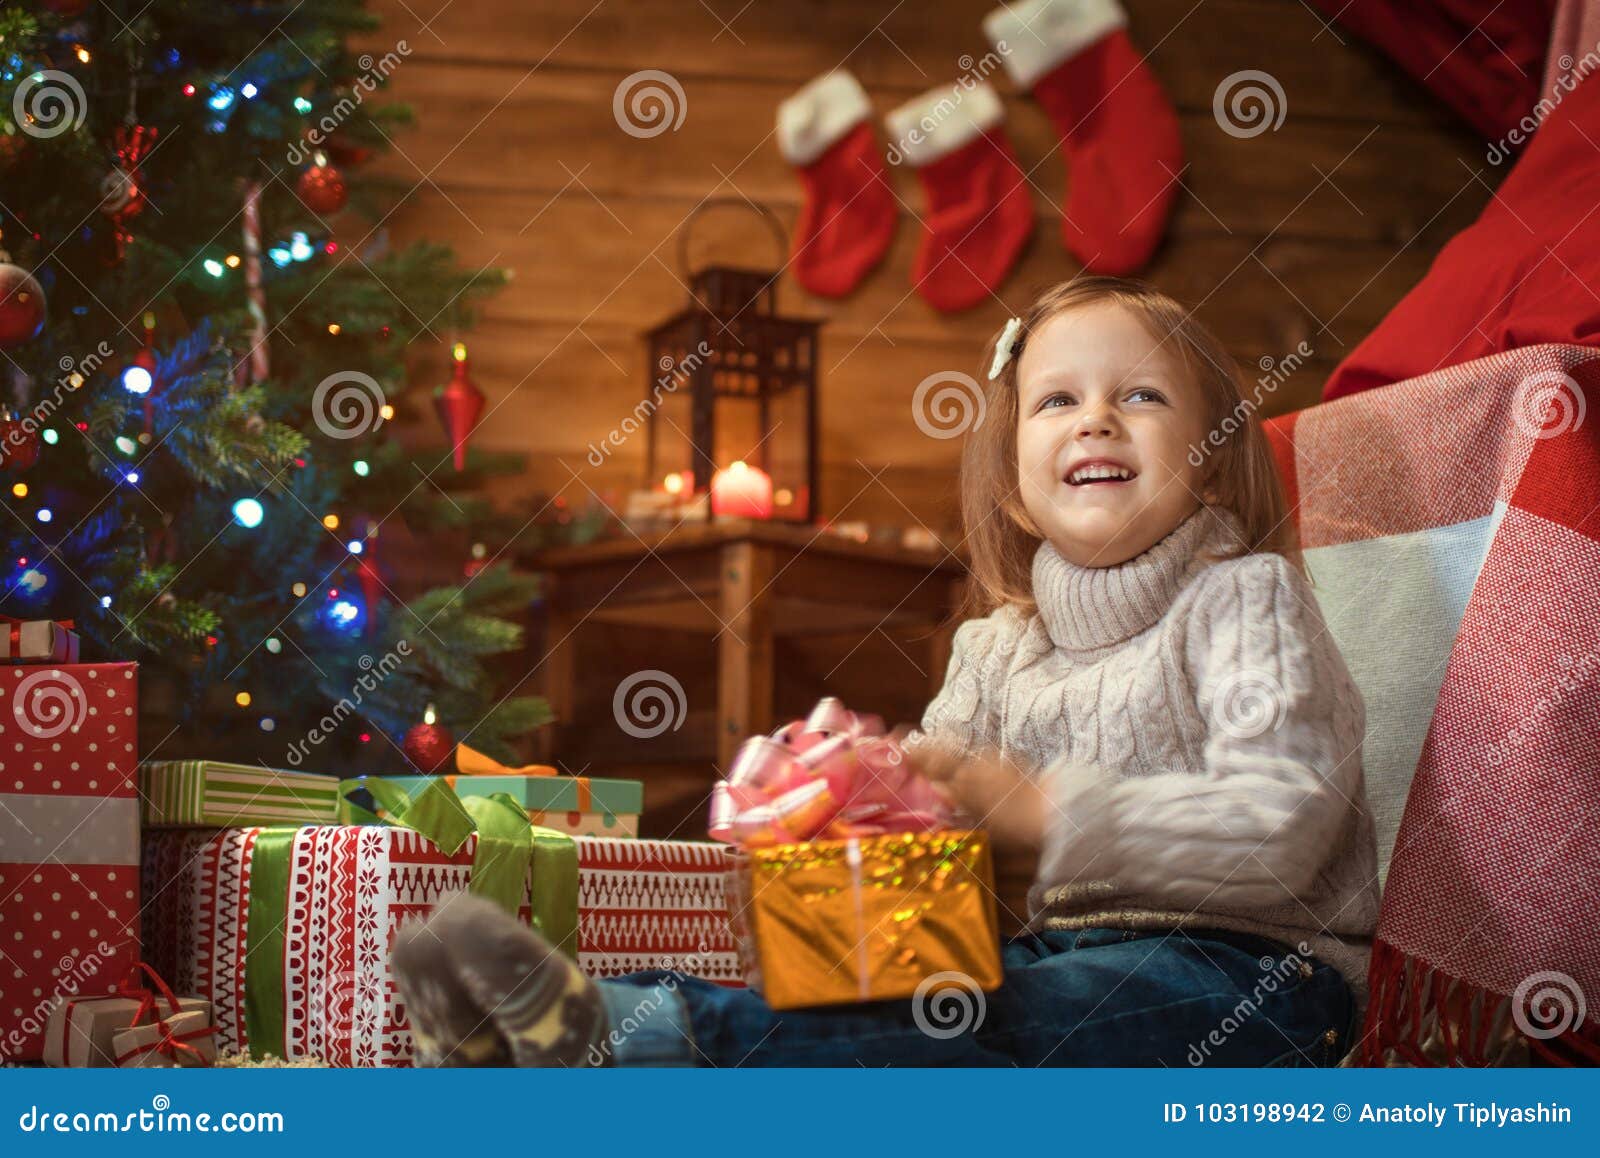 Girl at Home with a Christmas Tree, Presents and Candles Celebrating ...